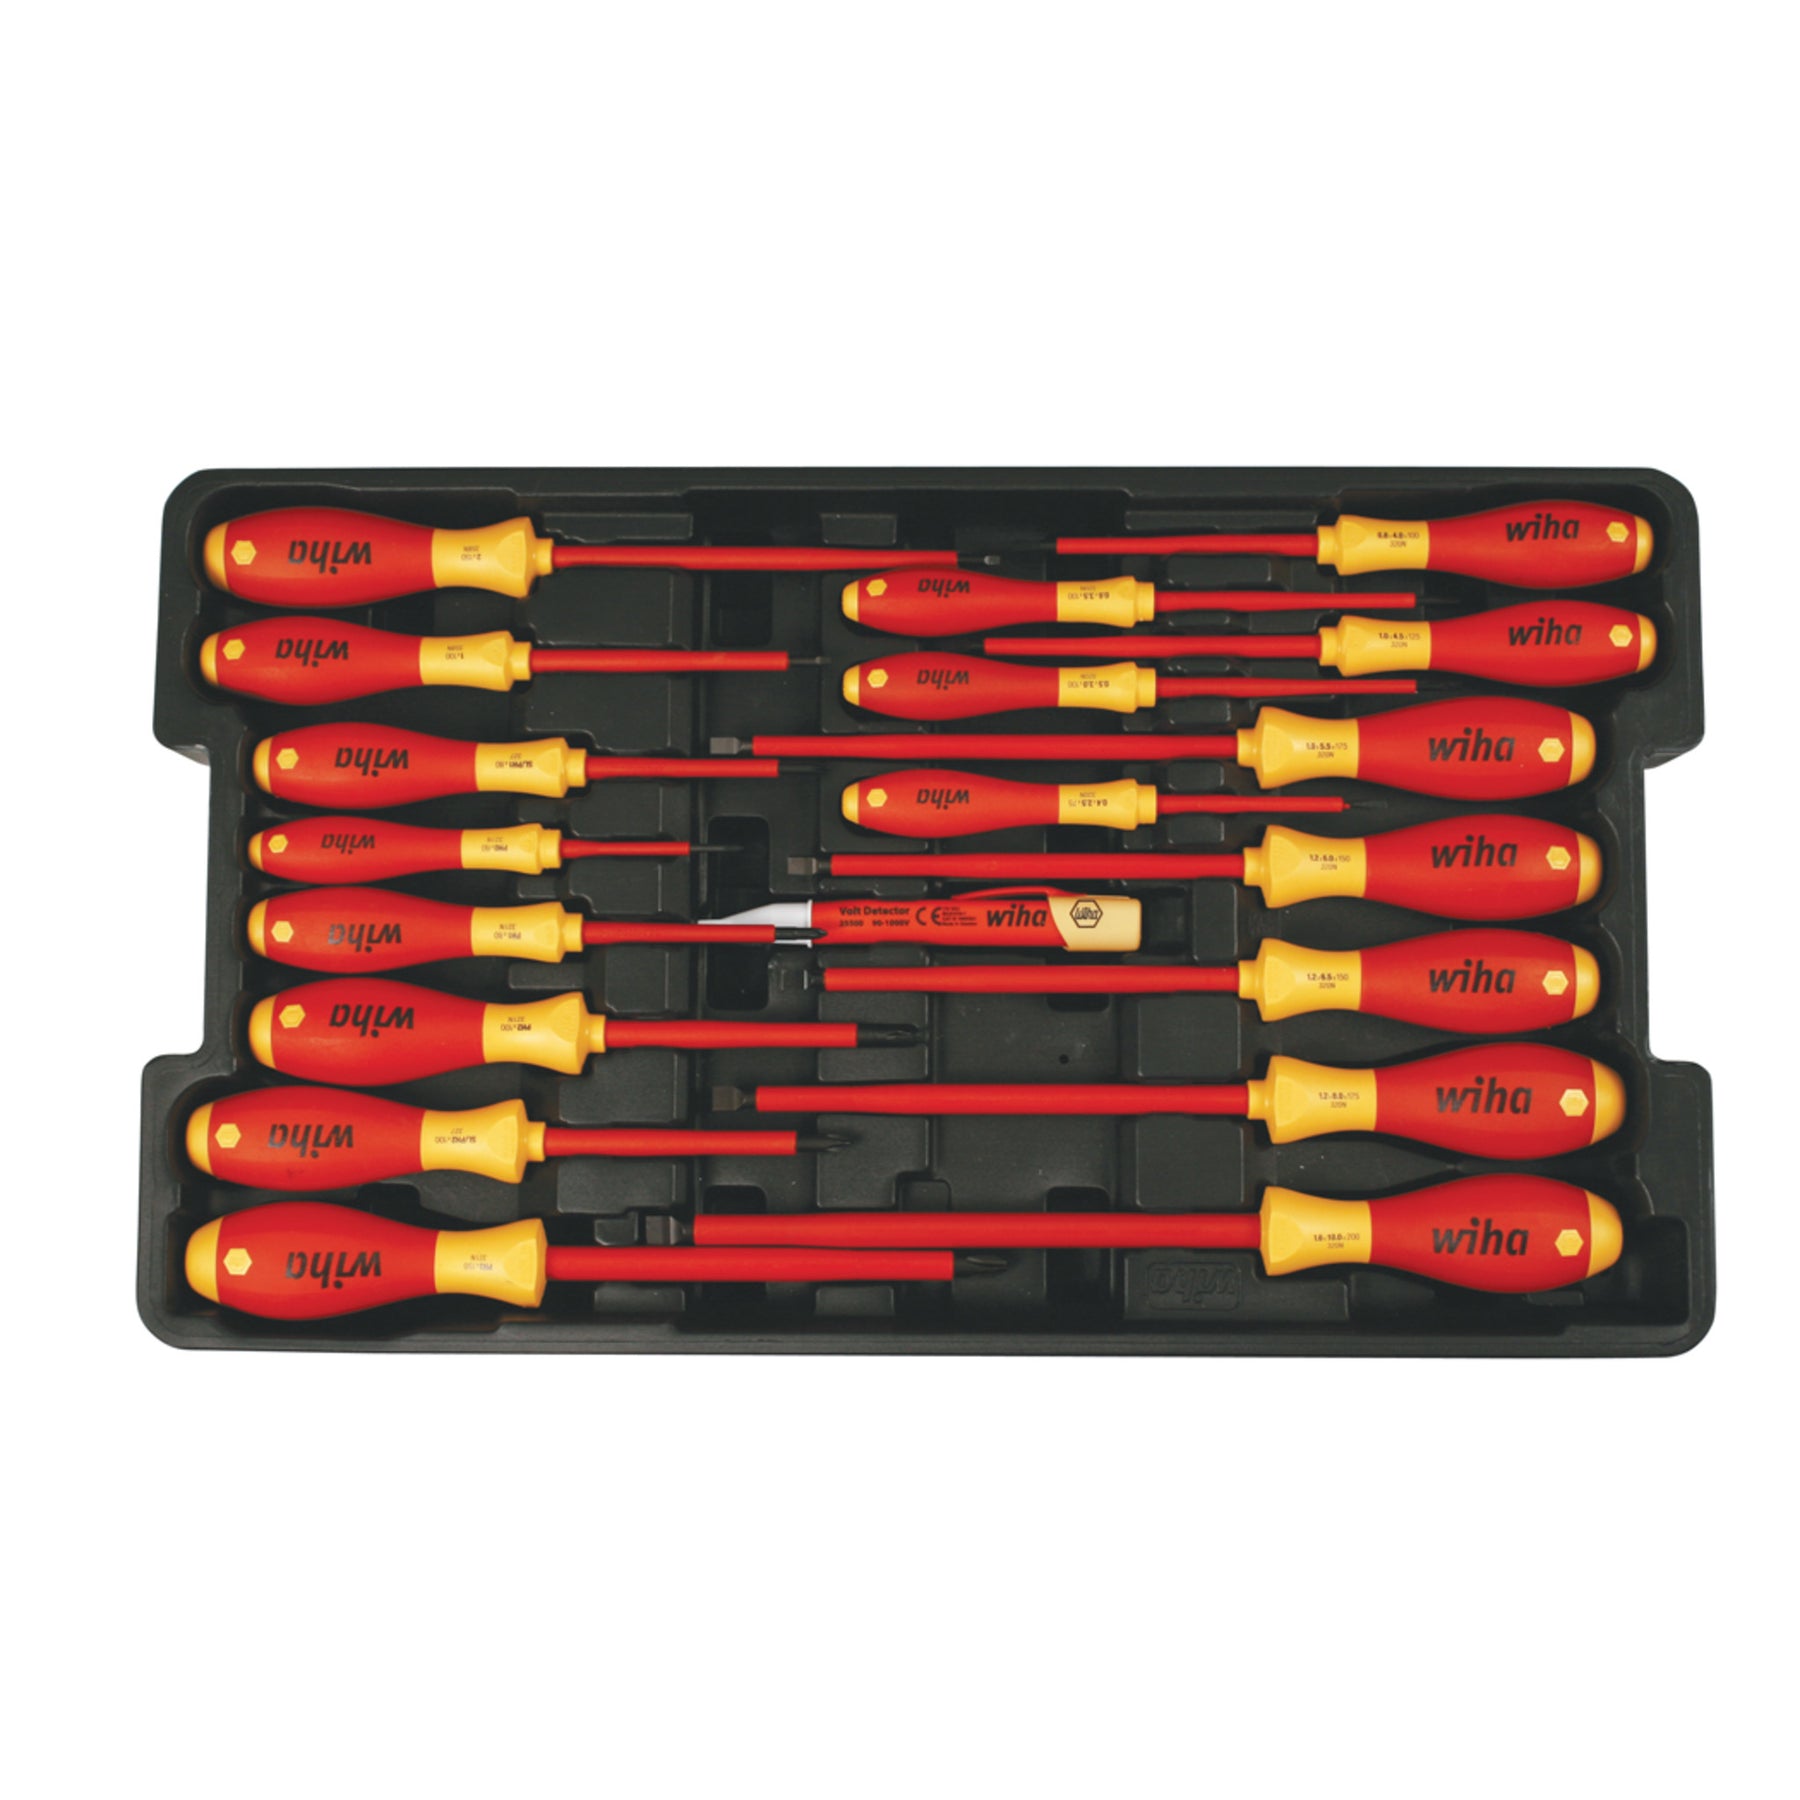 Wiha 32095 19 Piece Insulated SoftFinish Screwdriver and Cat III Voltage Detector Set with Toolbox Tray